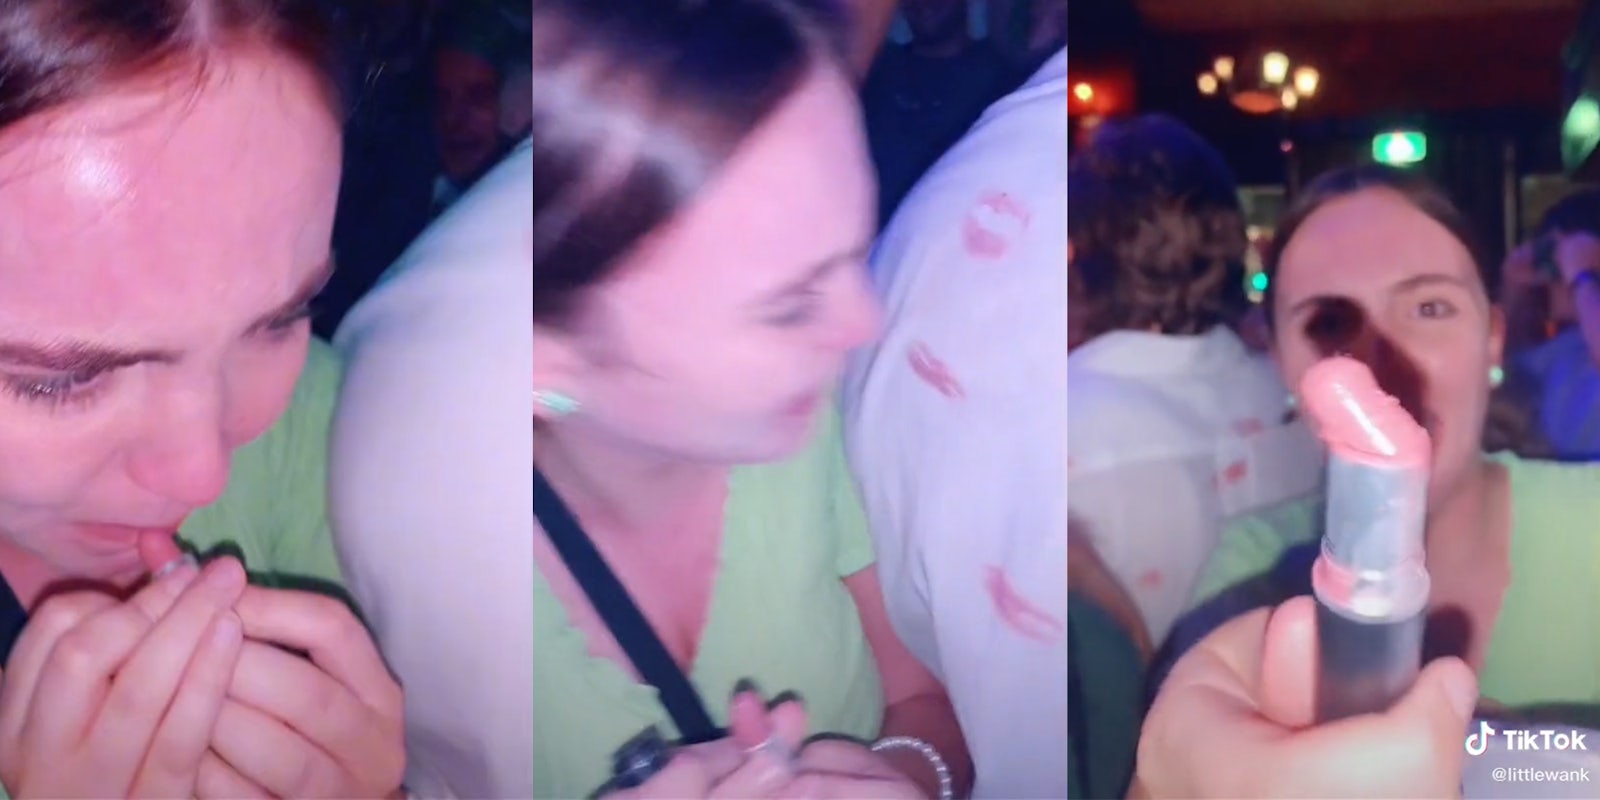 young woman puts on lipstick and kisses men's backs in bar